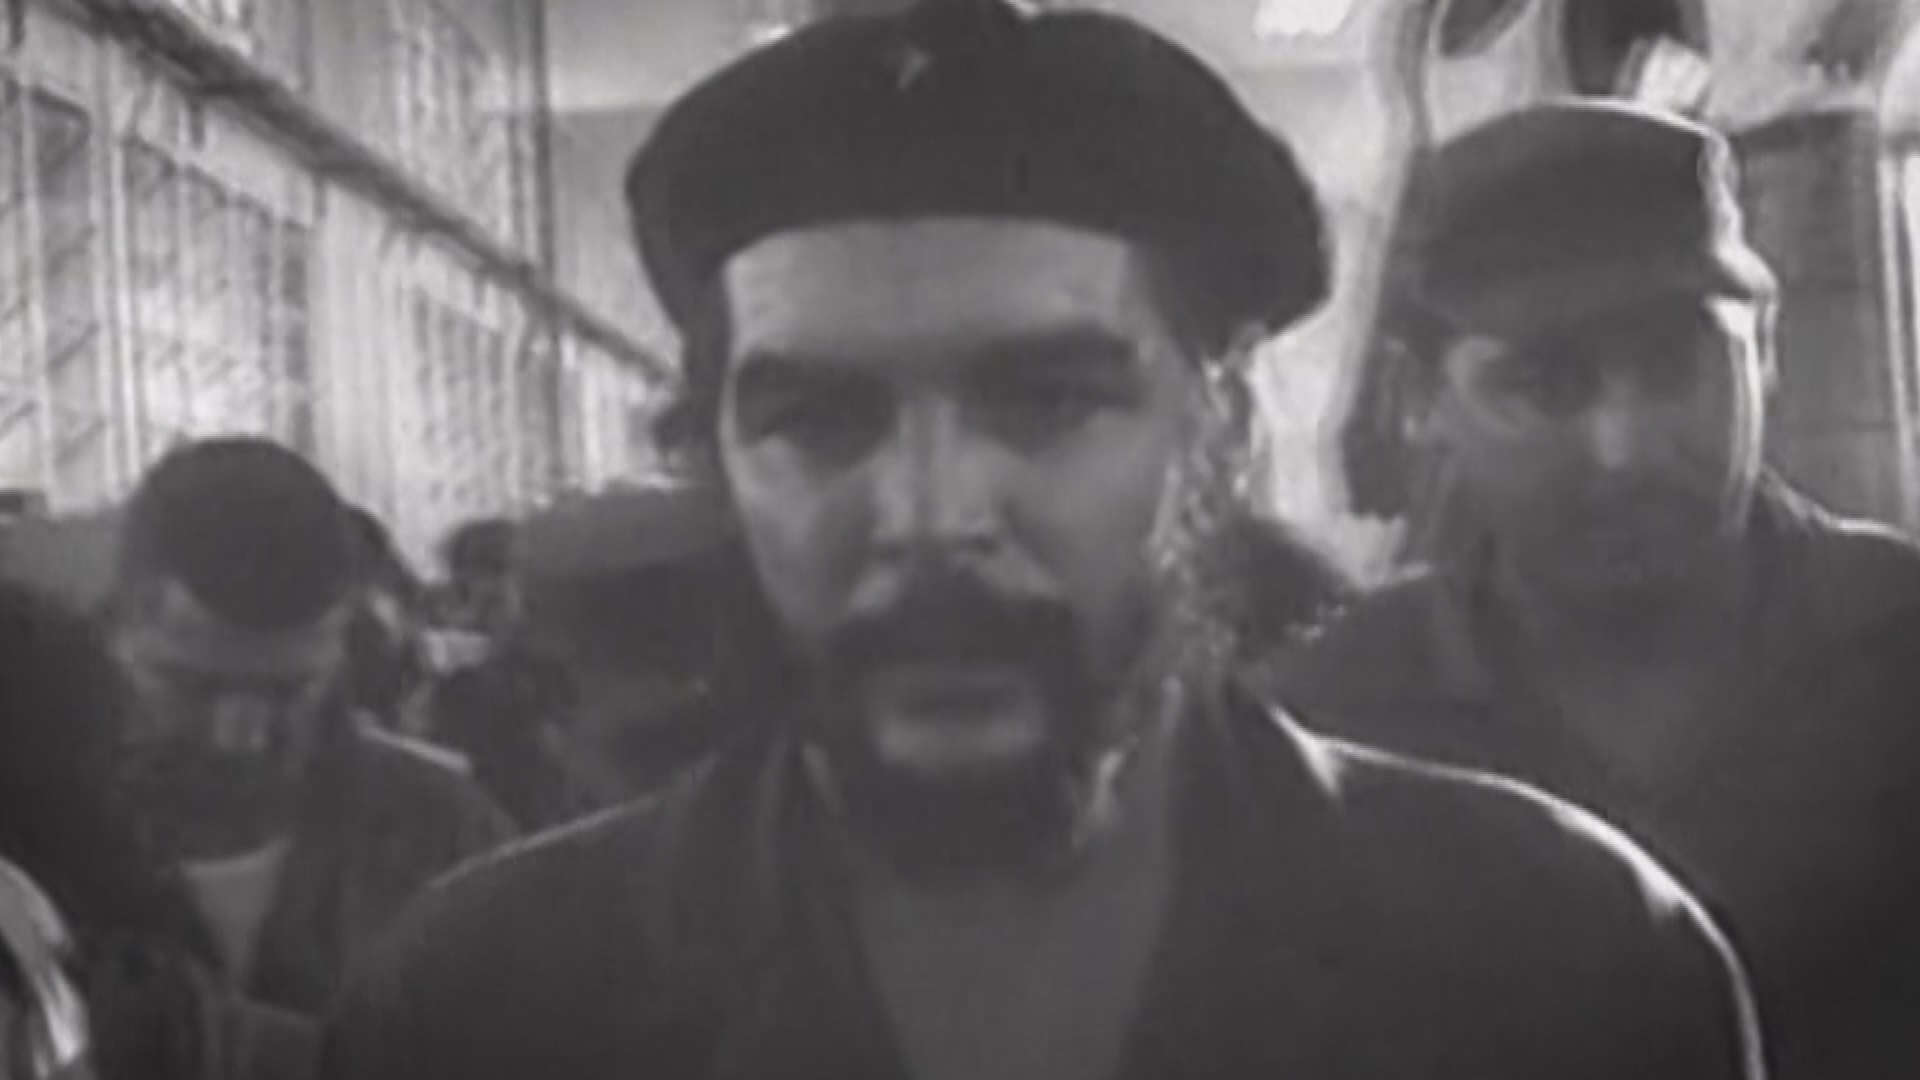 Famous quotations from revolutionary Che Guevara